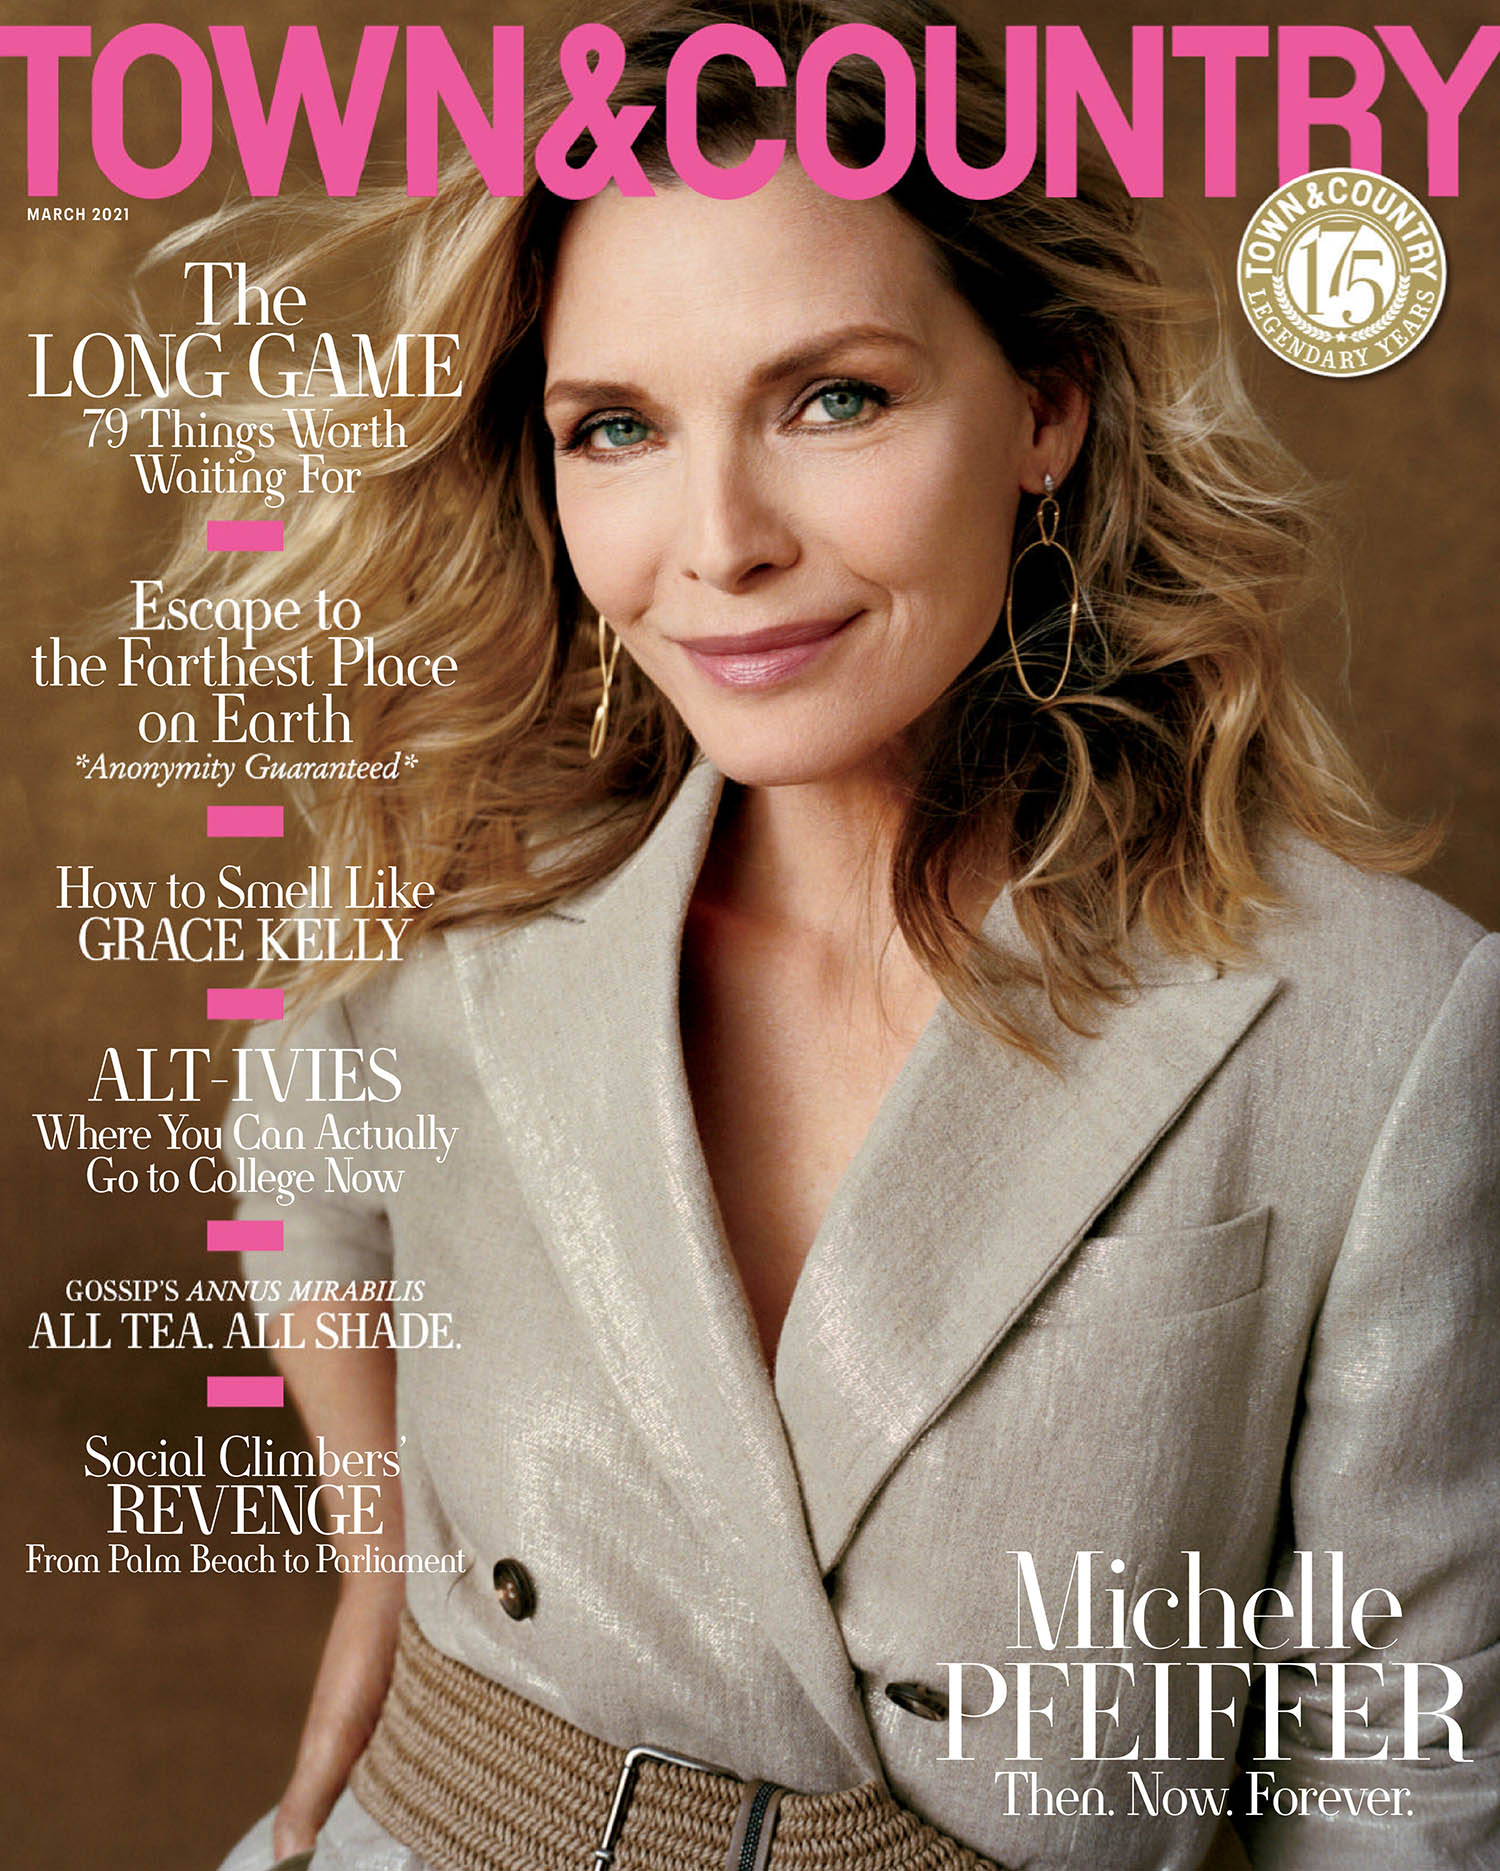 Michelle Pfeiffer covers Town & Country March 2021 by Shaniqwa Jarvis